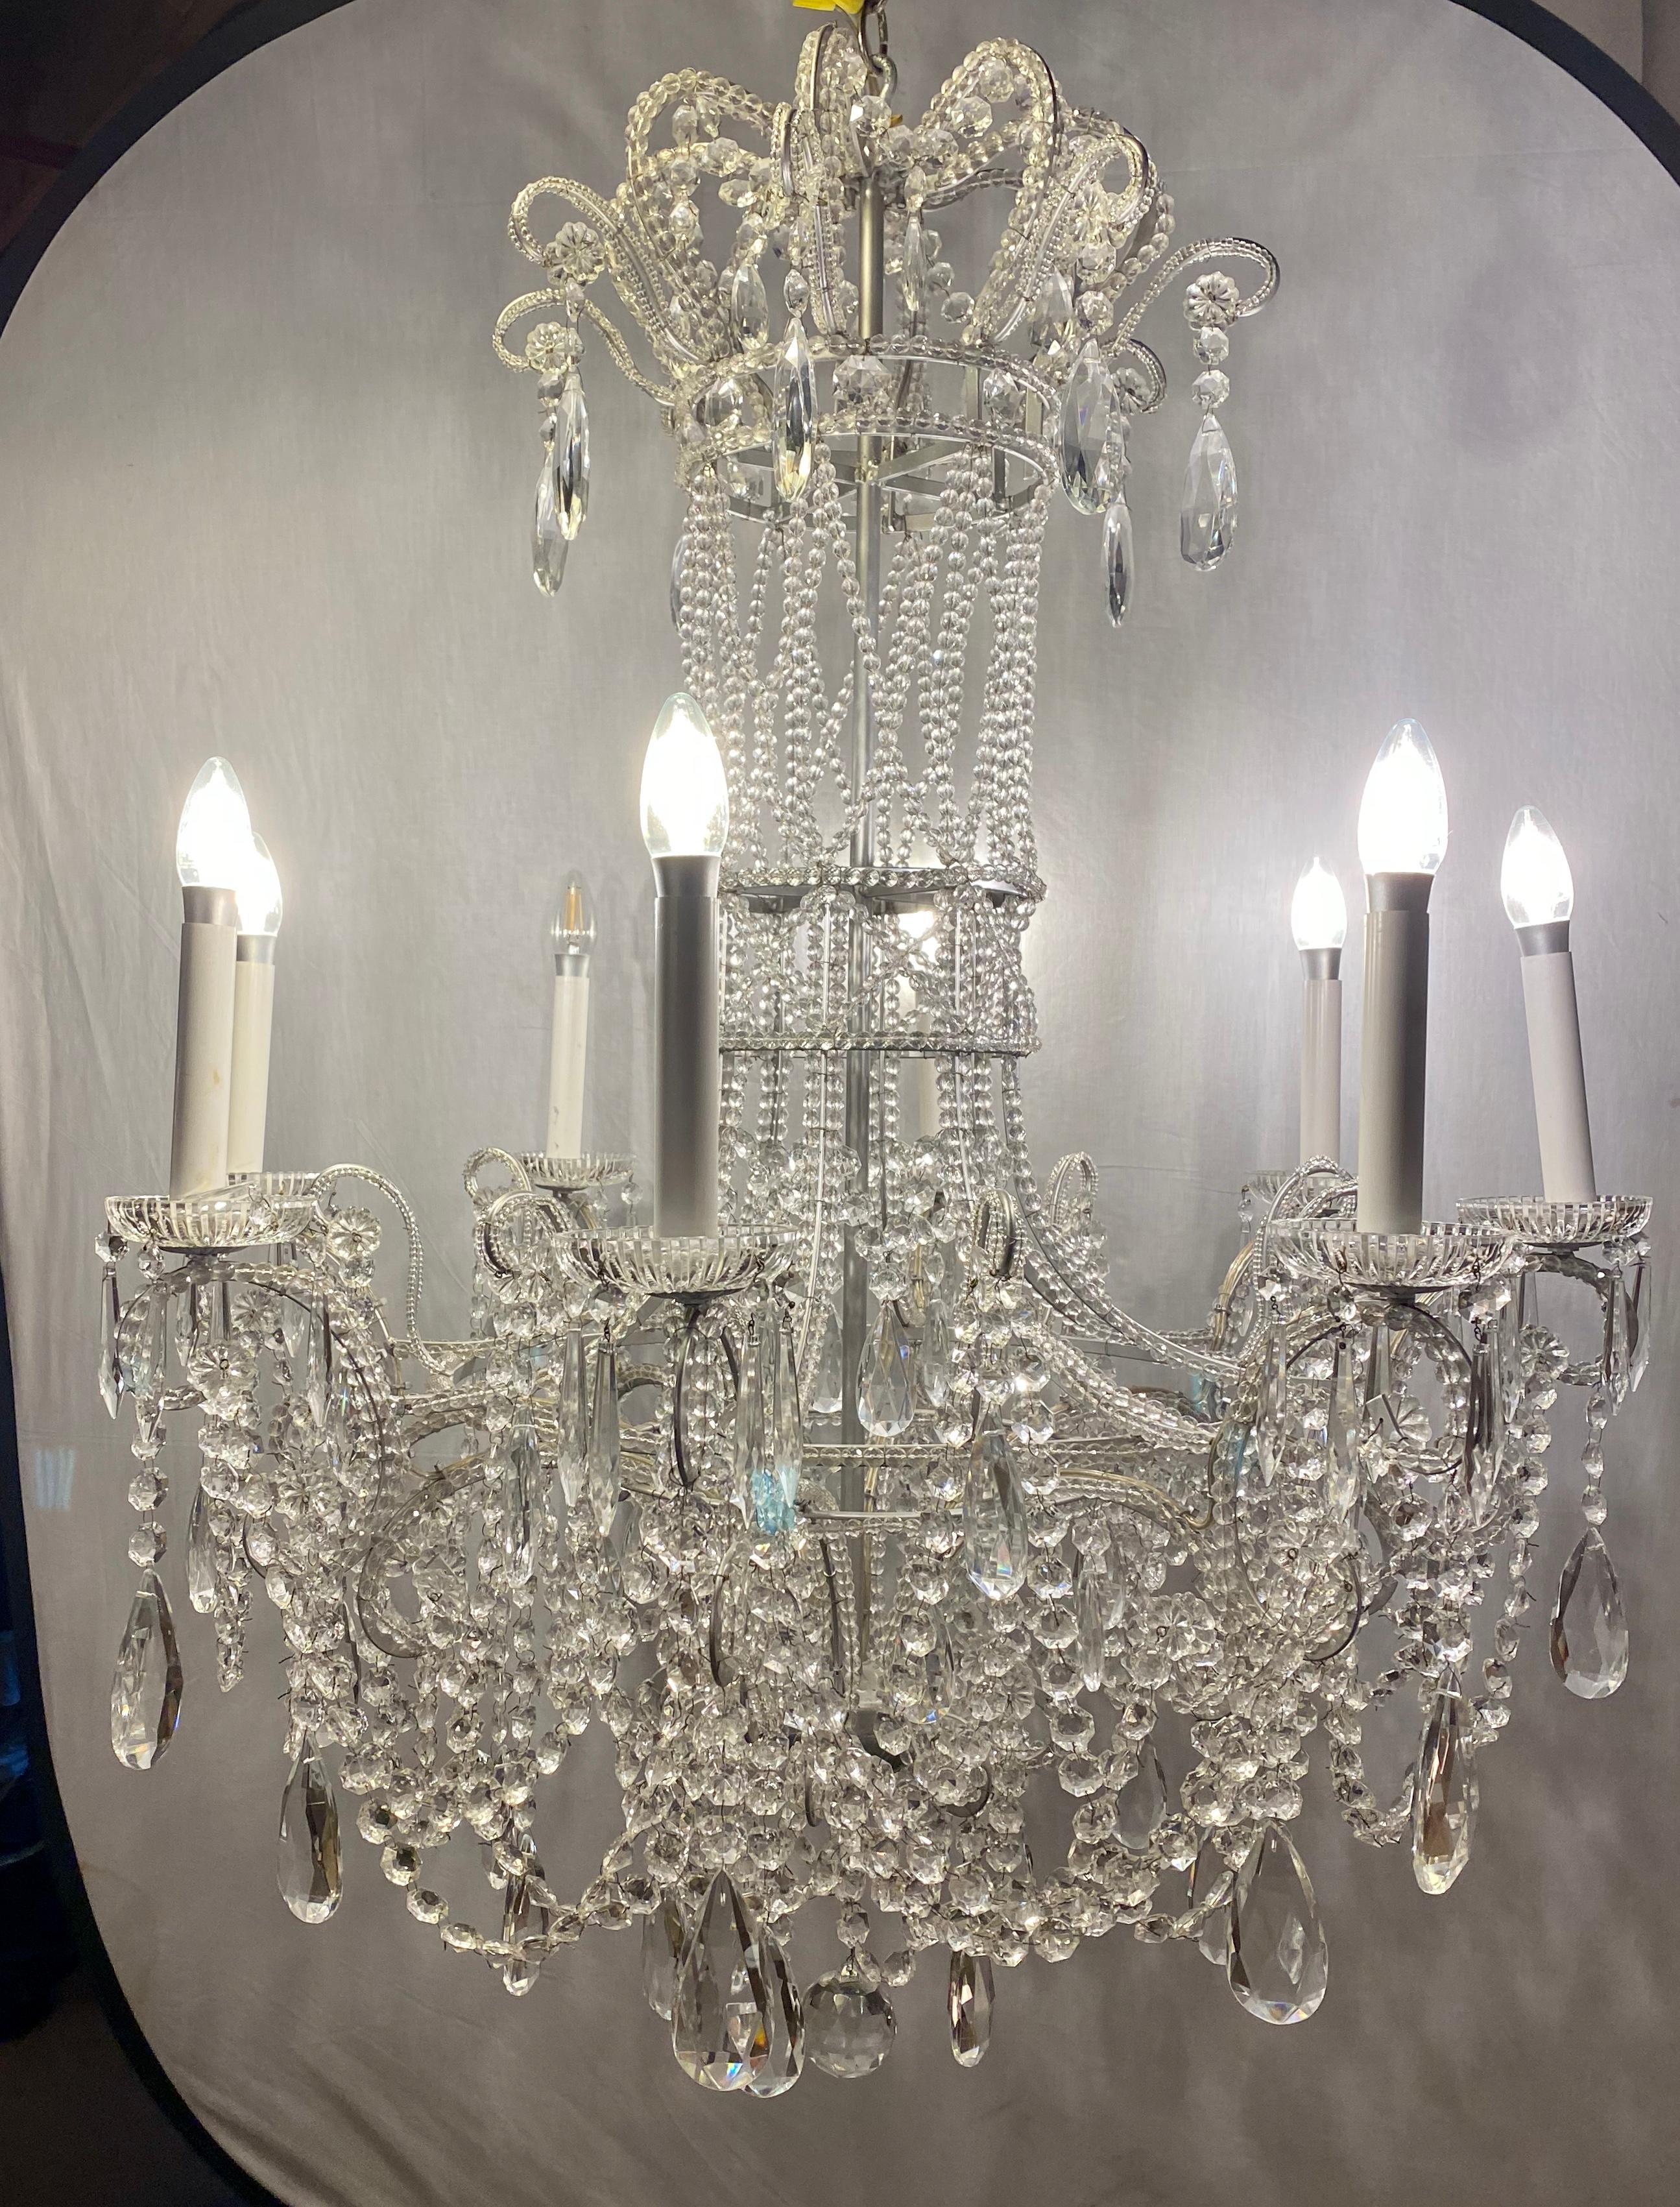 A continental silver leaf iron chandelier with fine crystal bead and pendant decoration. Quality rises up on this all crystal decorated chandelier. Large and impressive iron frame that is totally covered in cut crystals with a basket form column